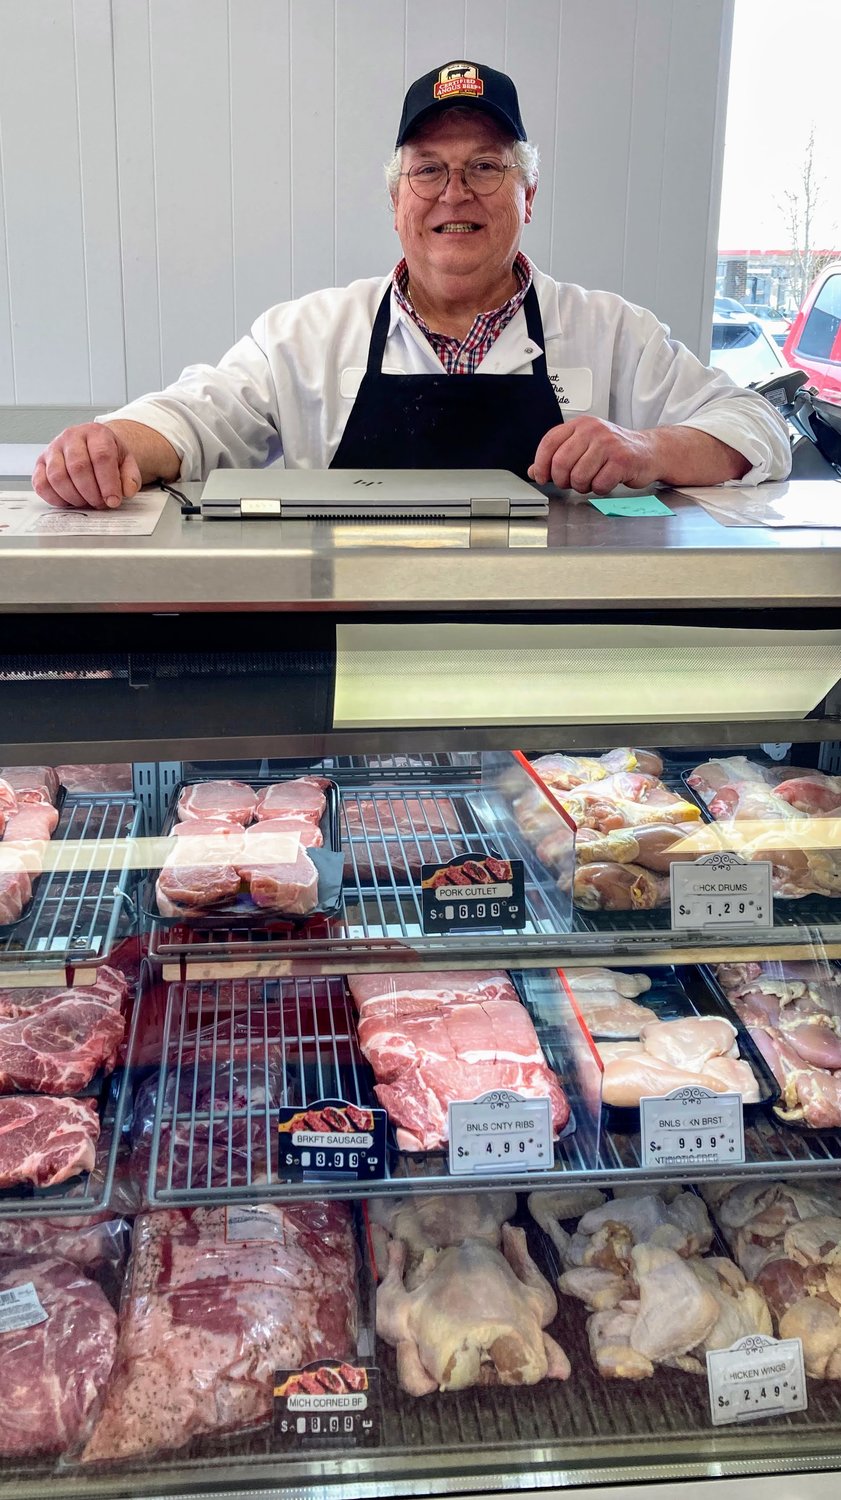 Ron West spent a long career as a meat cutter for various grocery stores, but it’s always been his dream to open his own butcher shop.